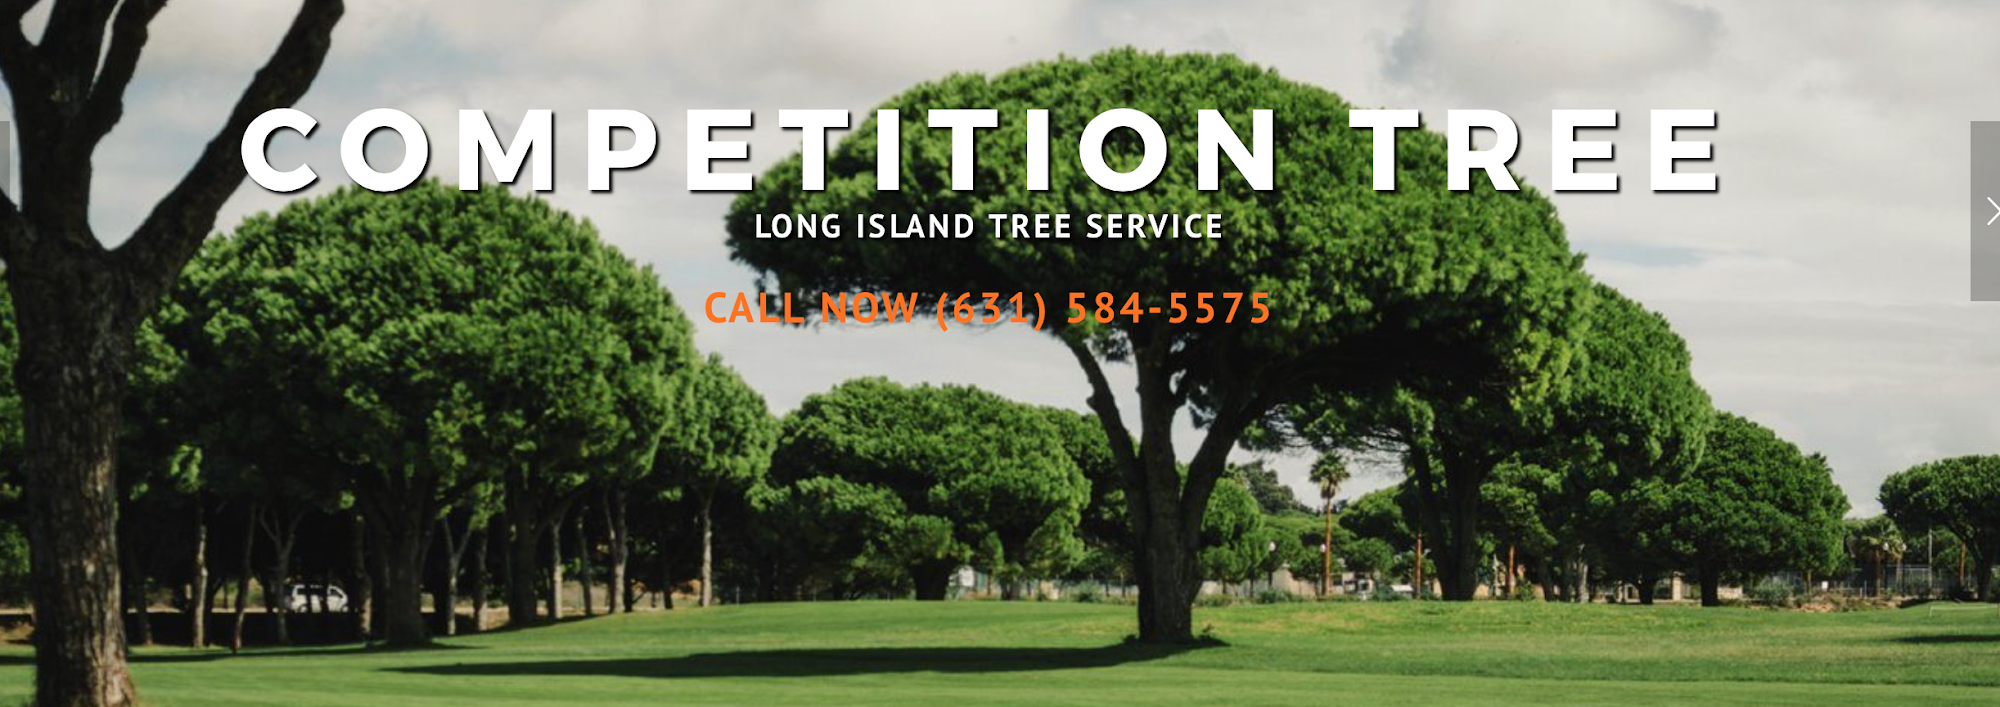 Competition Tree Service